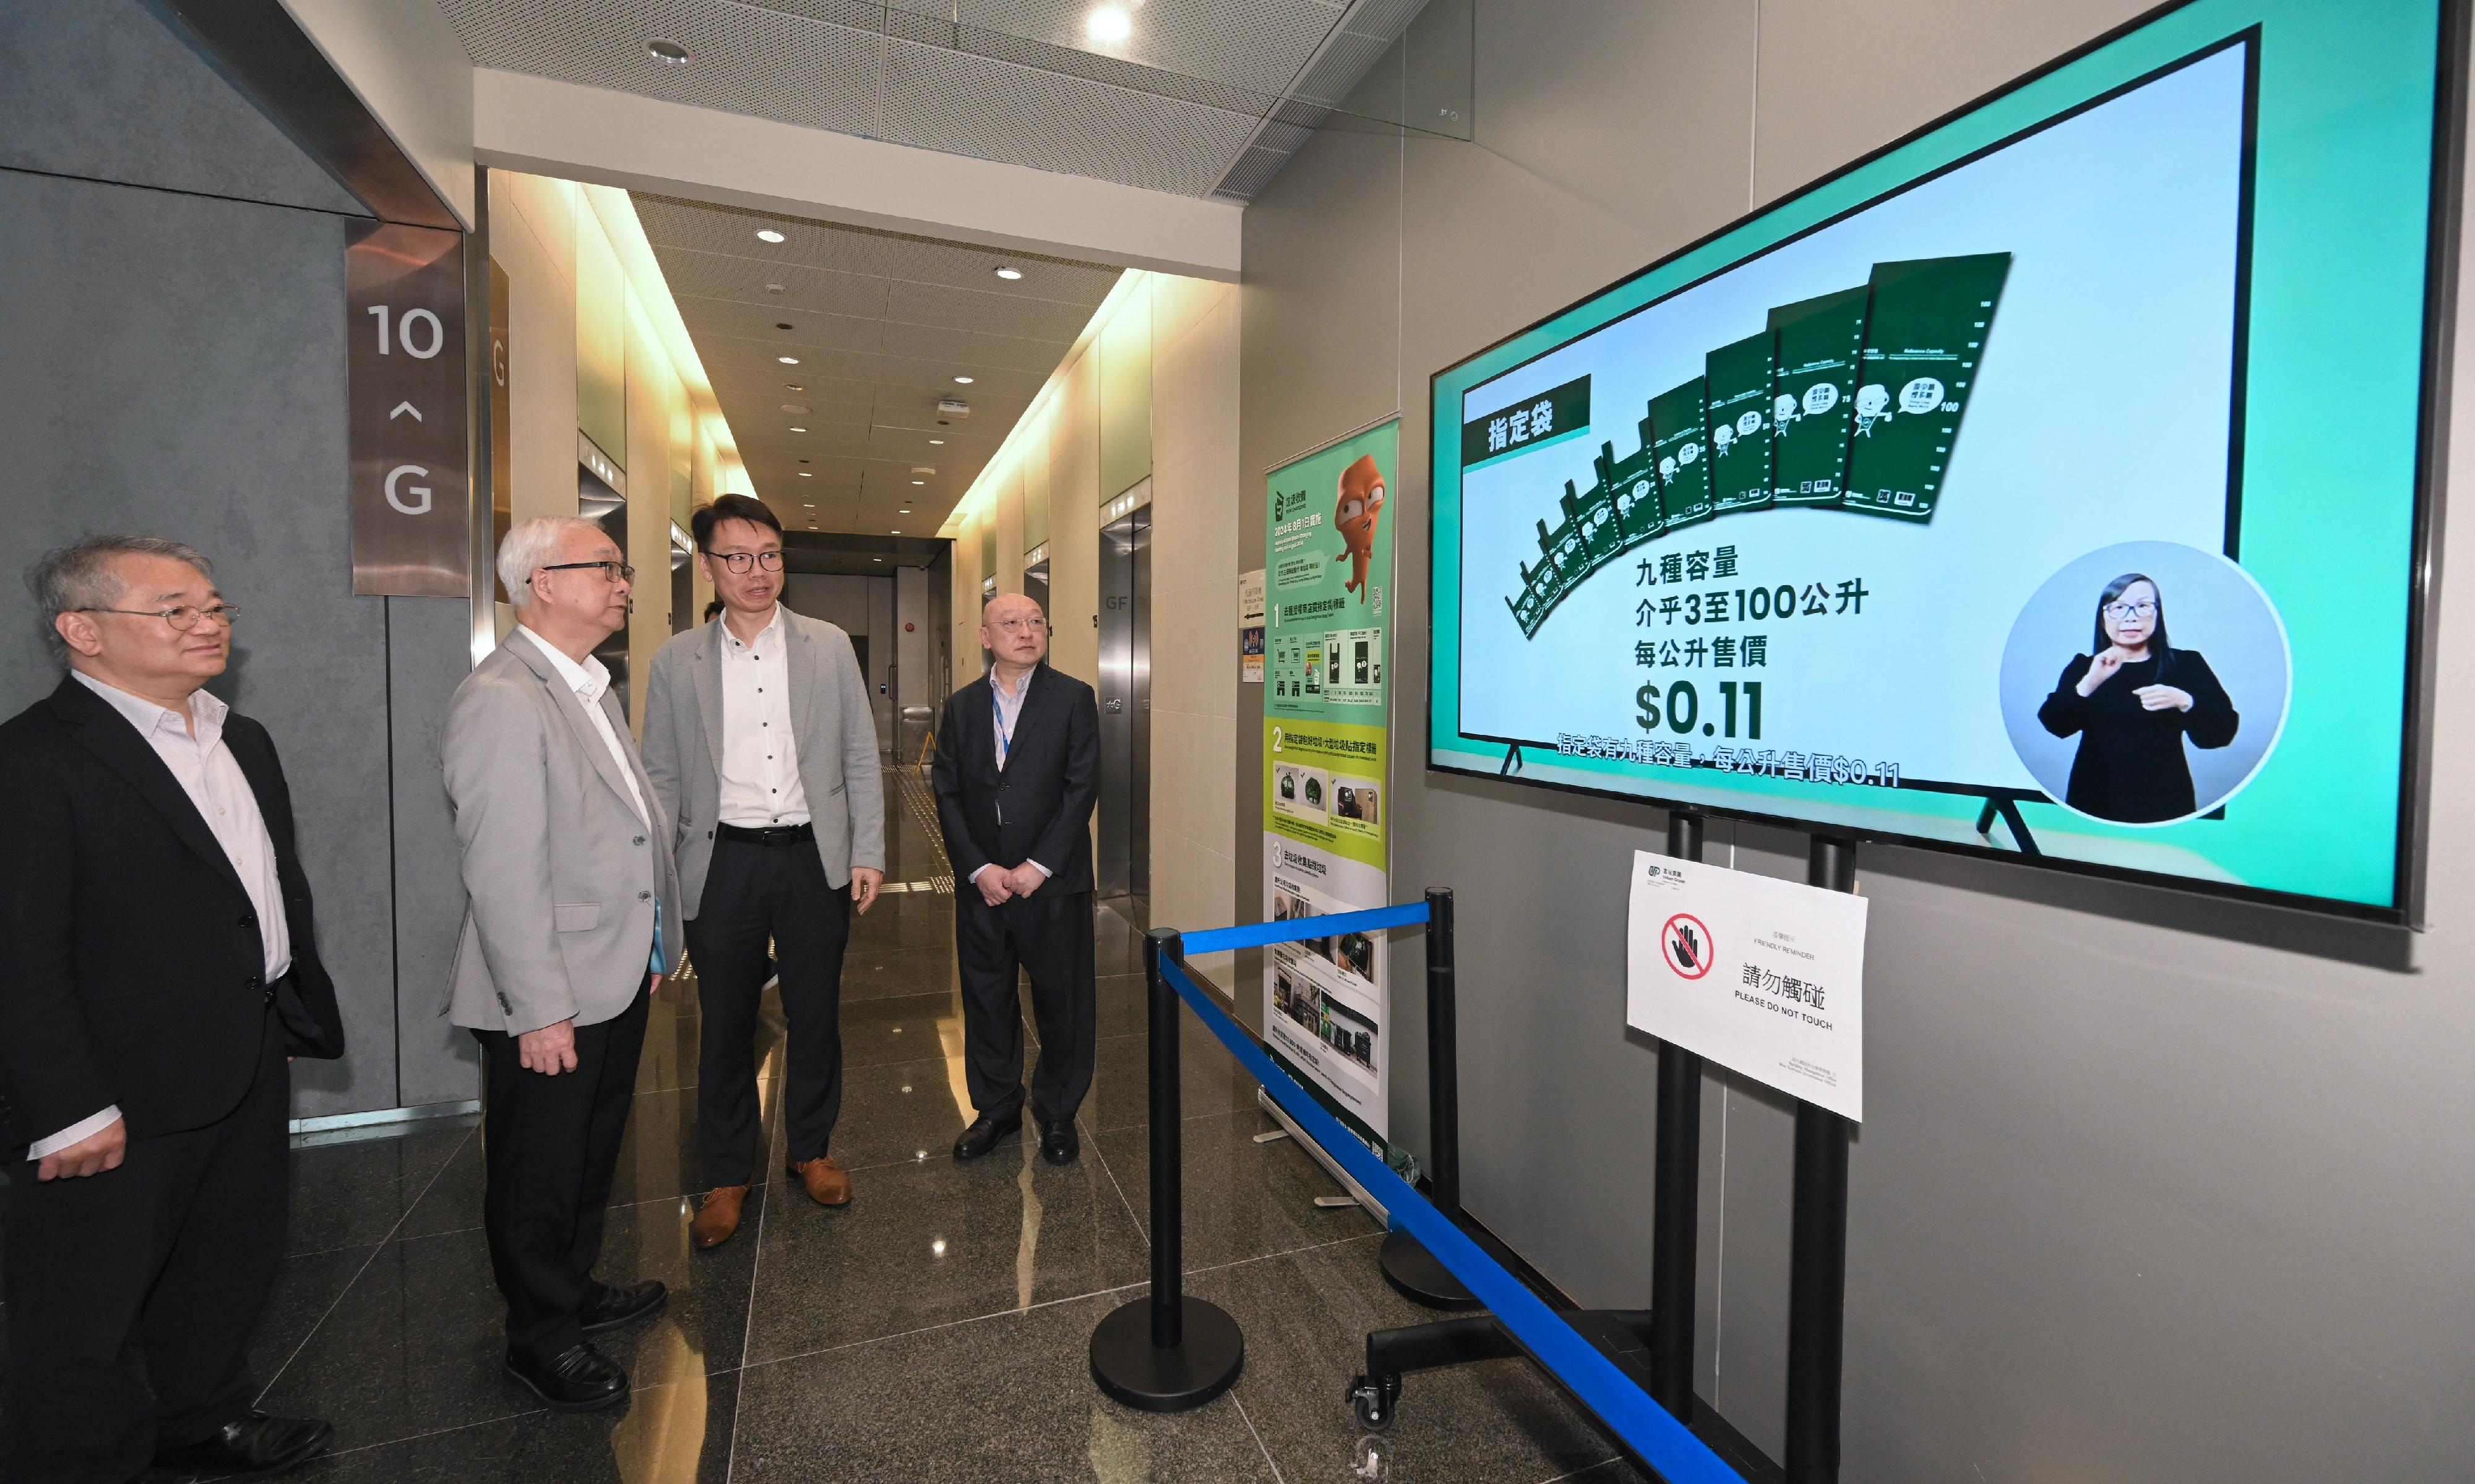 The Secretary for Environment and Ecology, Mr Tse Chin-wan, today (March 27) inspected various premises under the Municipal Solid Waste Charging Demonstration Scheme to understand the premises' preparatory work. Photo shows Mr Tse (second left) learning about the preparatory work for the Demonstration Scheme at West Kowloon Government Offices. He is accompanied by the Director of Environmental Protection, Dr Samuel Chui (first left), and the Government Property Administrator, Mr Eugene Fung (first right).